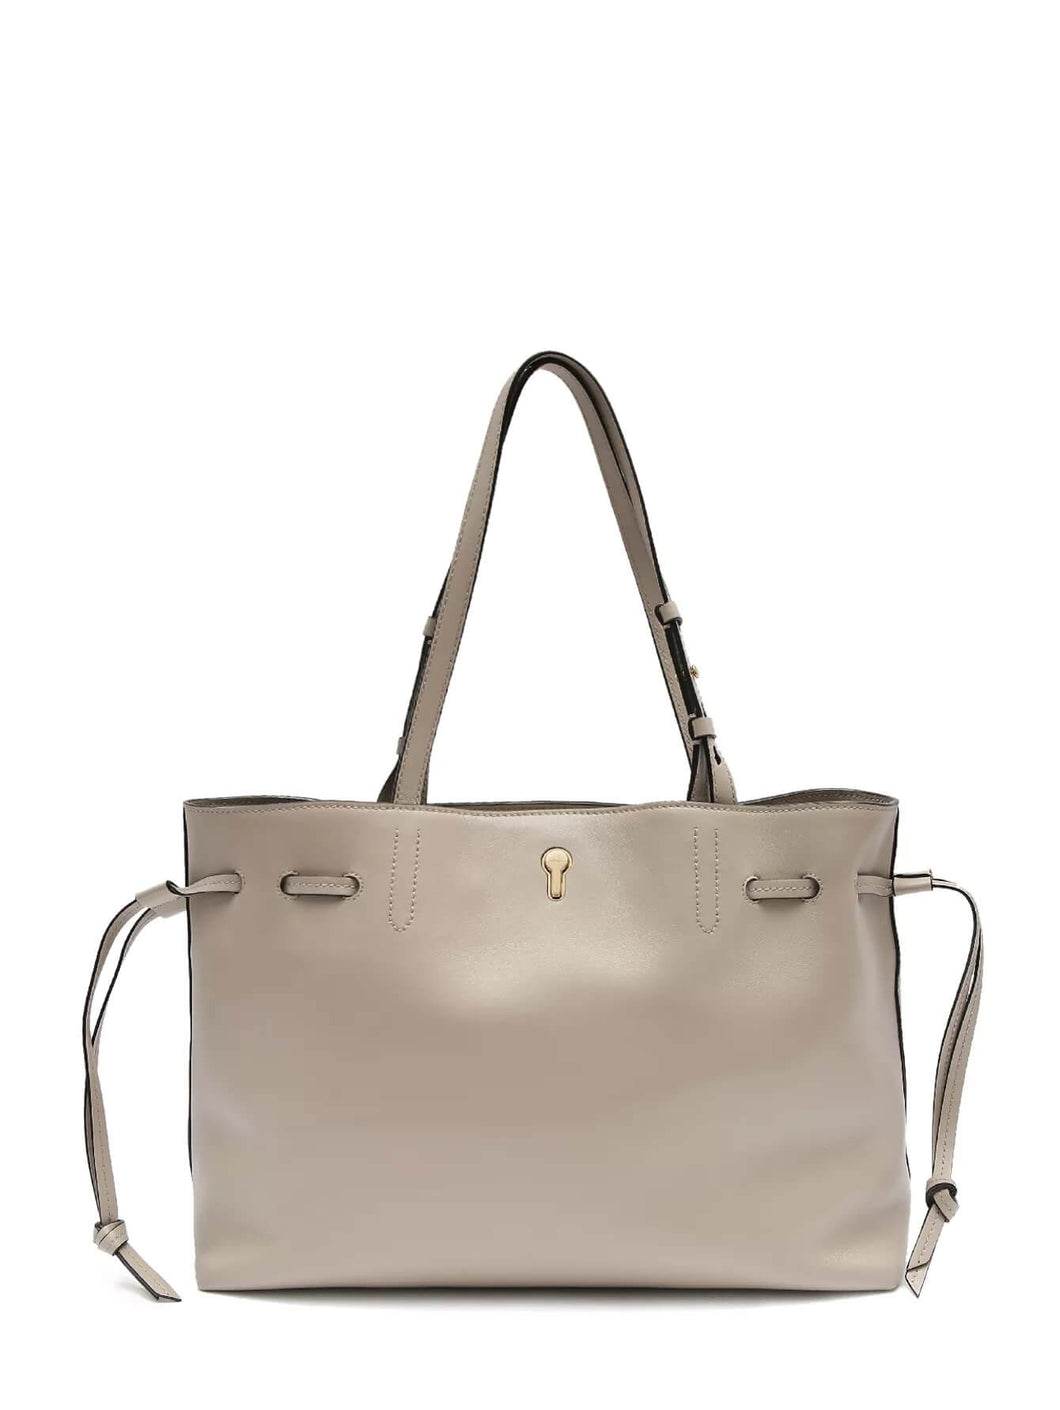 NEW Bally Cybelle Women's 6232700 Beige Leather Tote Bag MSRP $1150